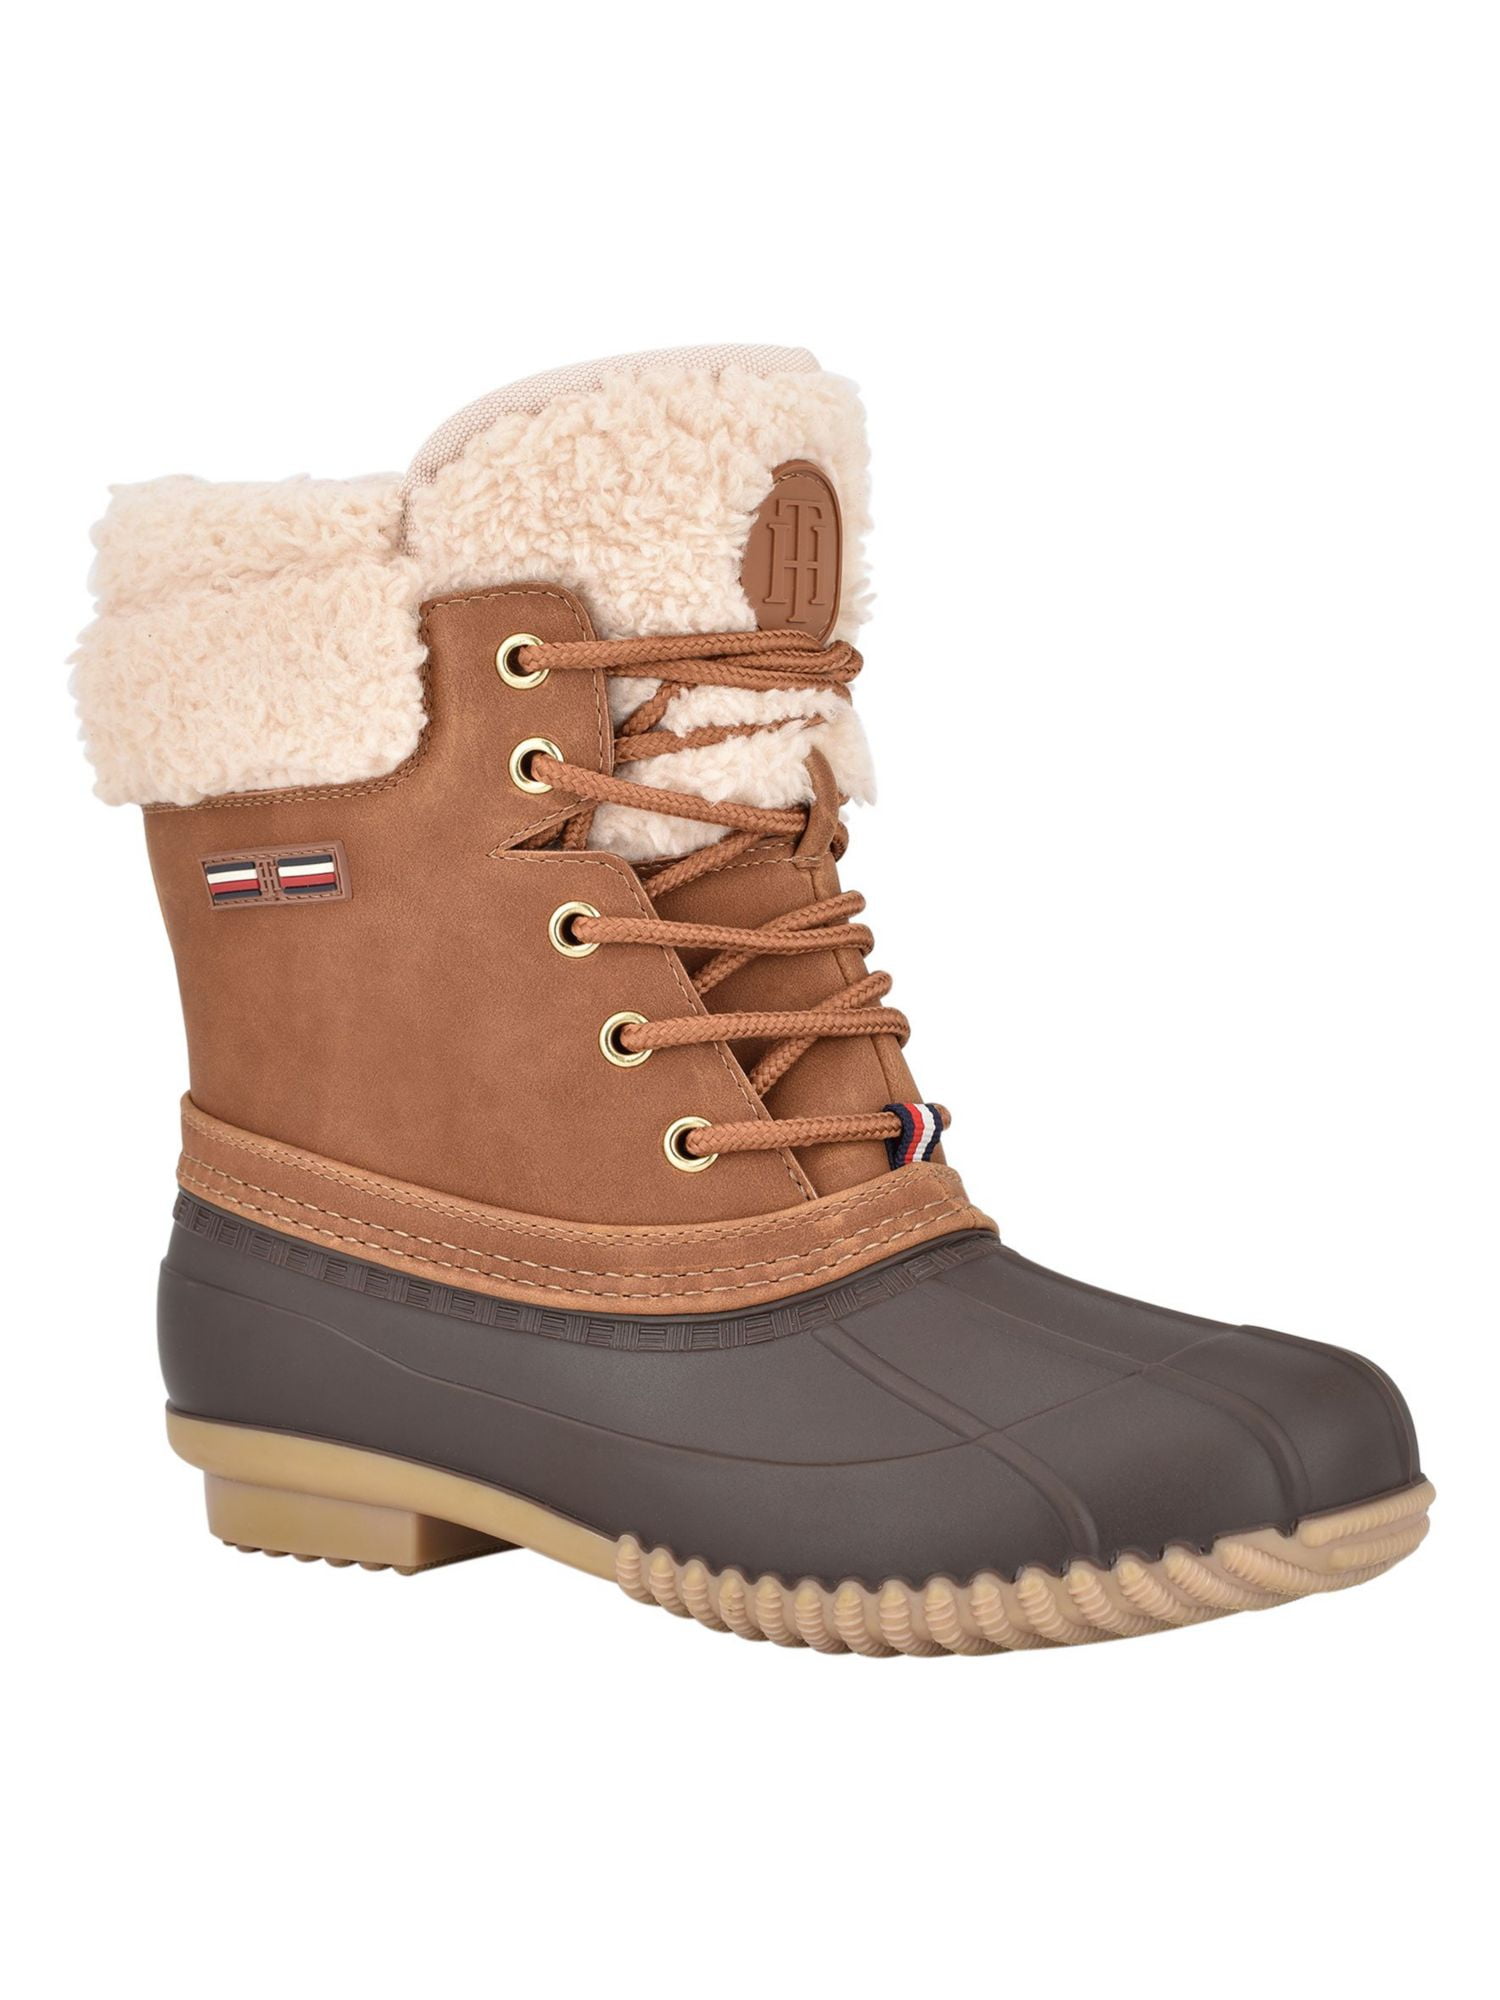 TOMMY HILFIGER Womens Brown Cushioned Resistant Toe Block Heel Lace-Up Duck Boots - Walmart.com